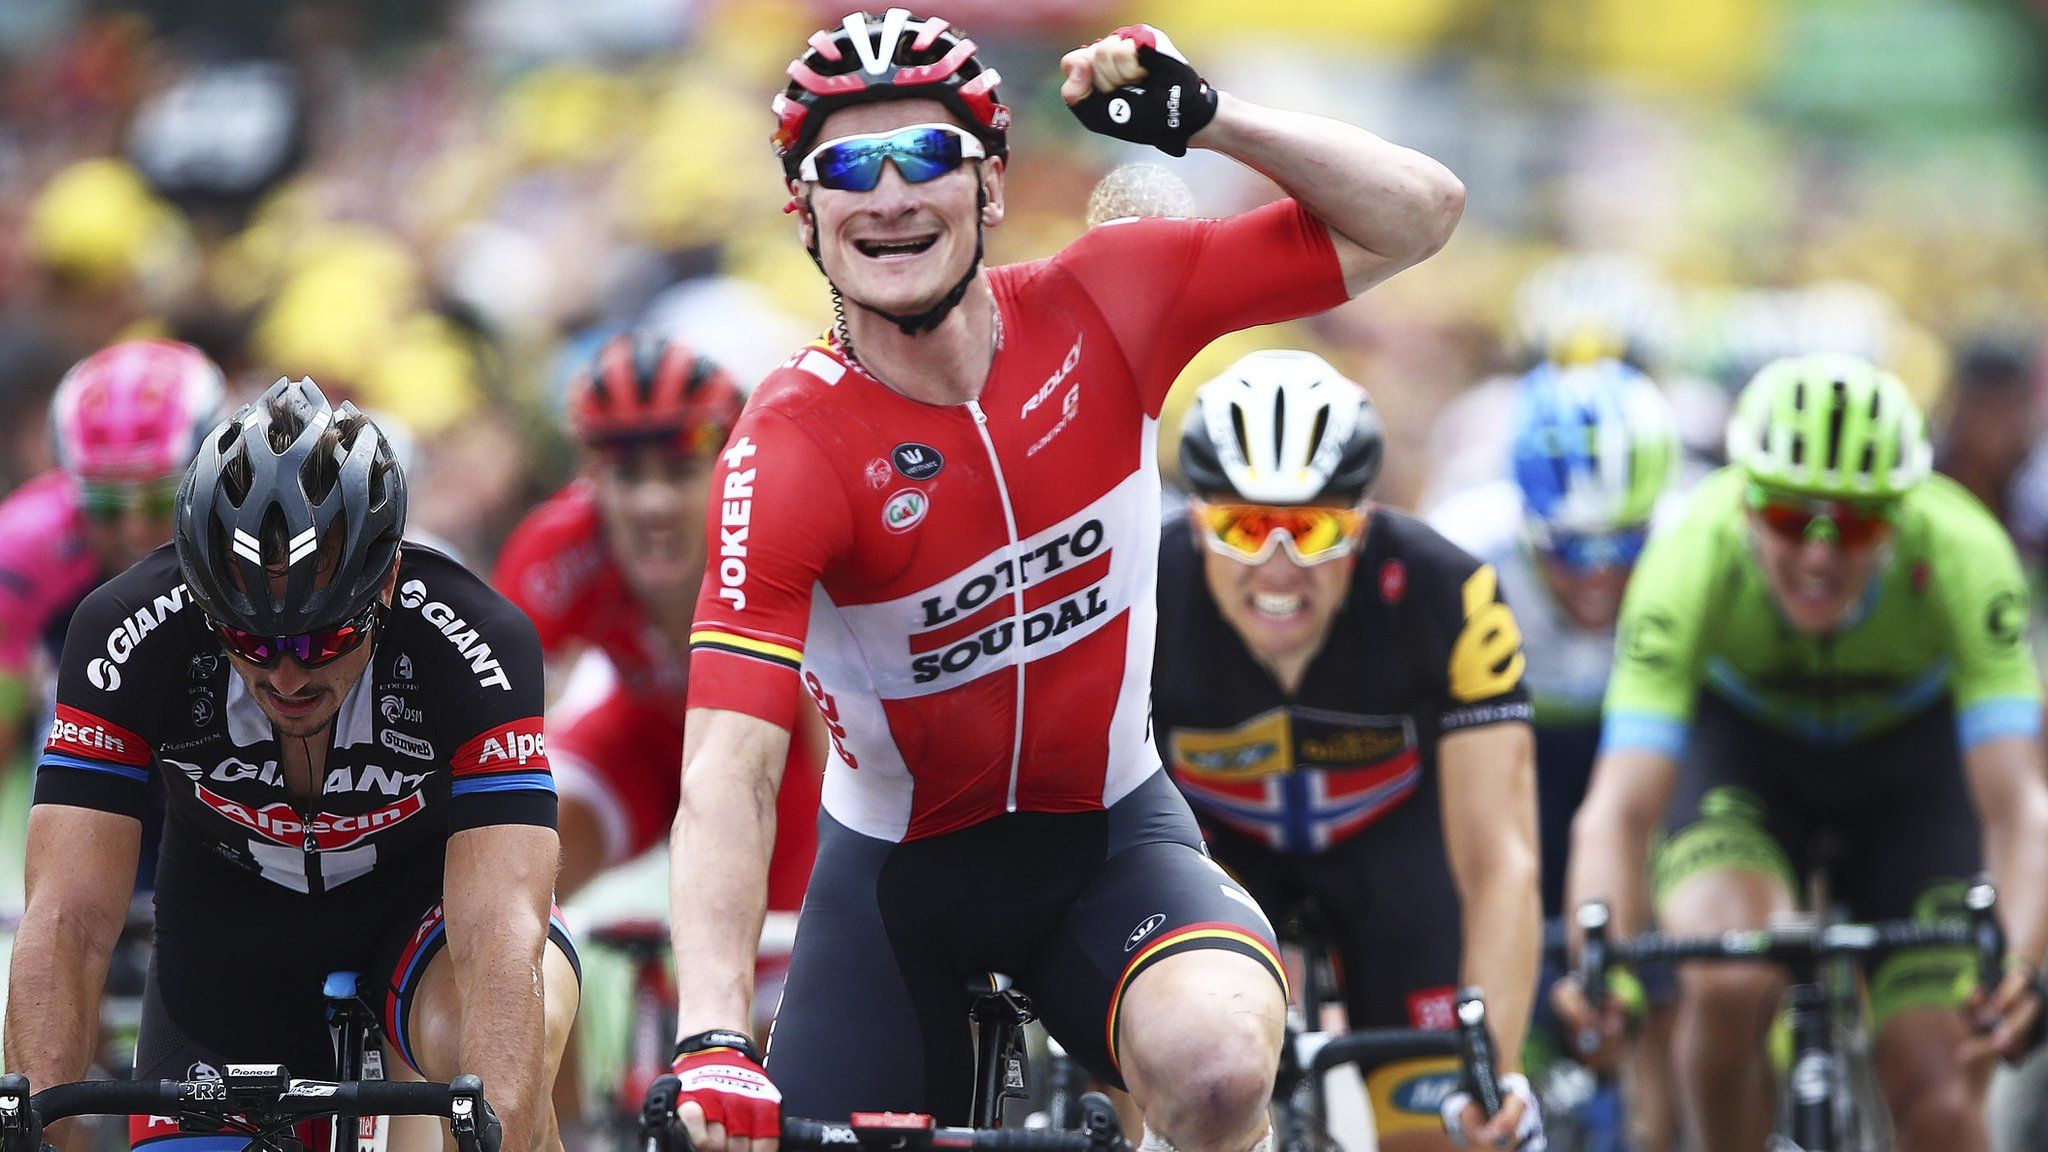 Tour de France 2015: Andre Greipel sprints to win stage 15 - BBC Sport